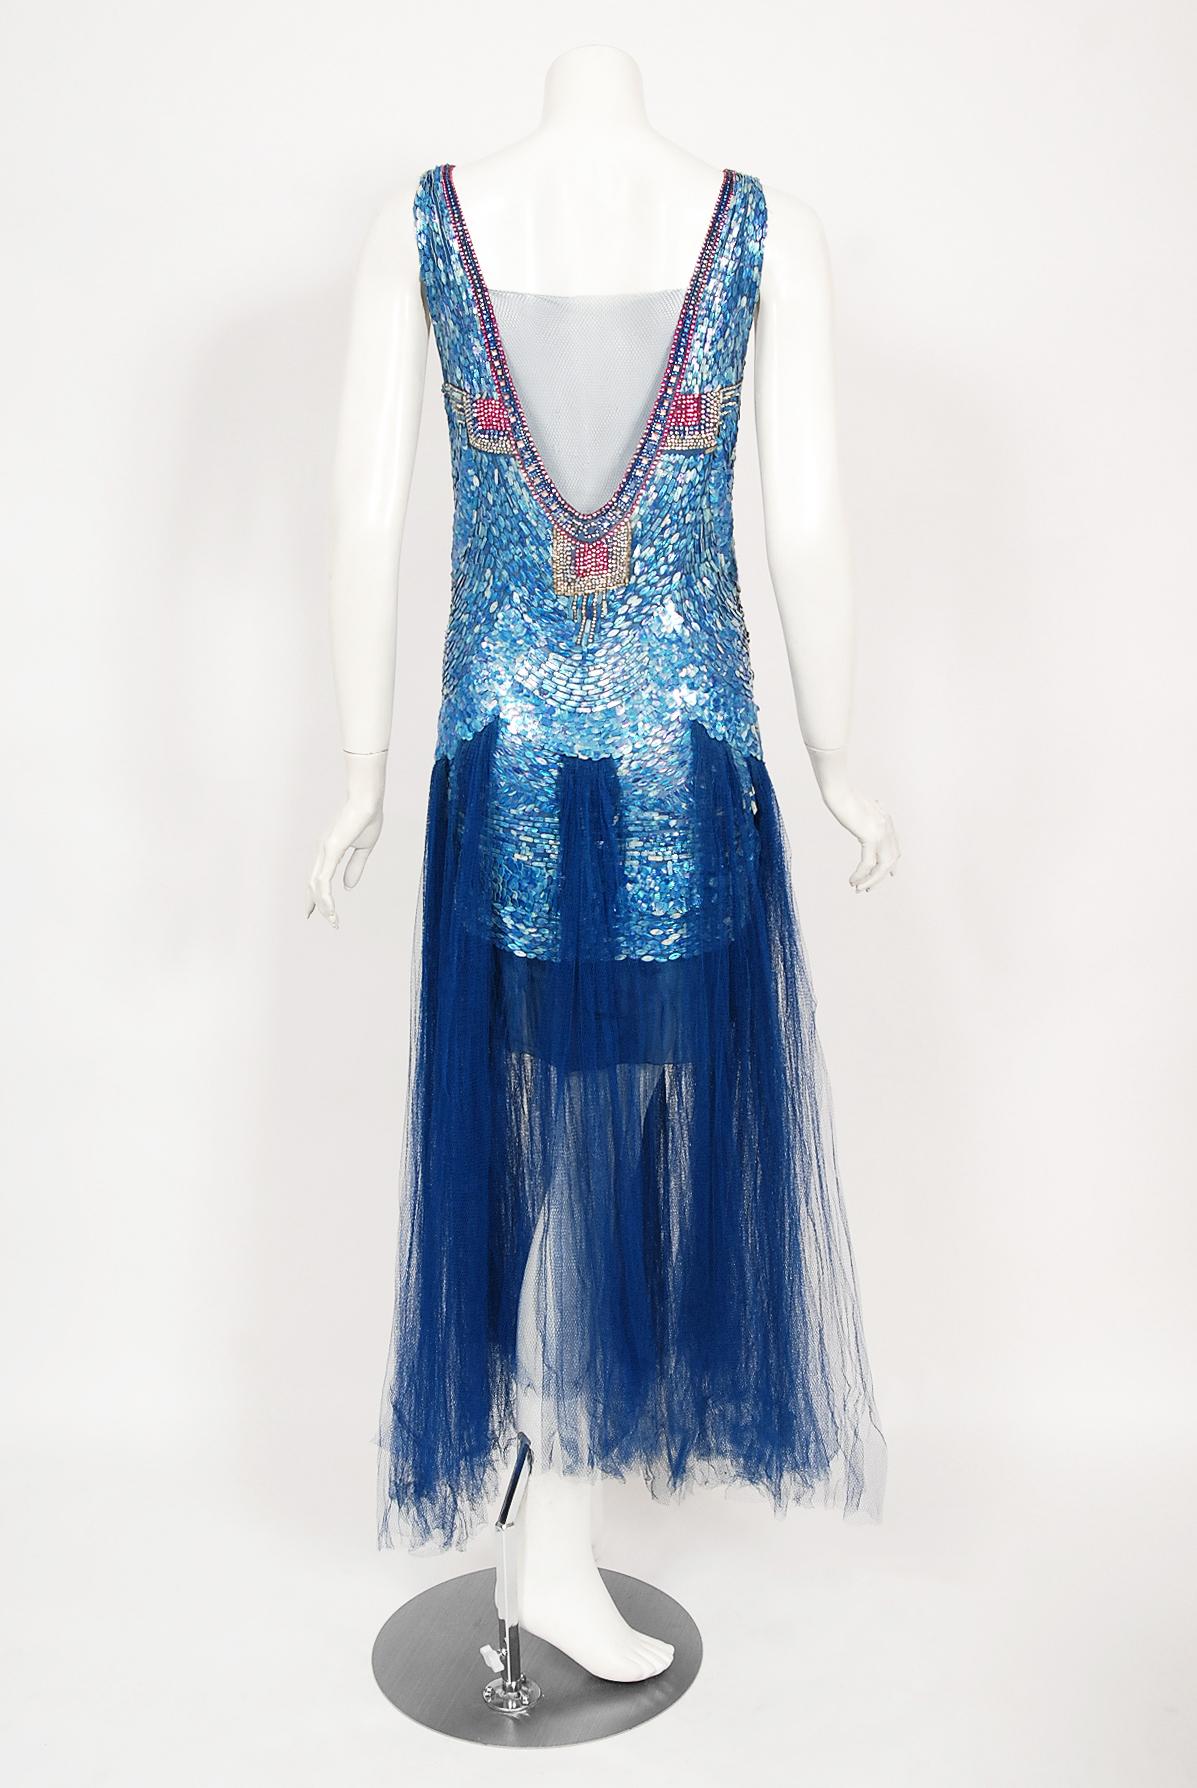 Vintage 1920's Couture Royal Blue Sequin Beaded Sheer Tulle Mermaid Flapper Gown 6